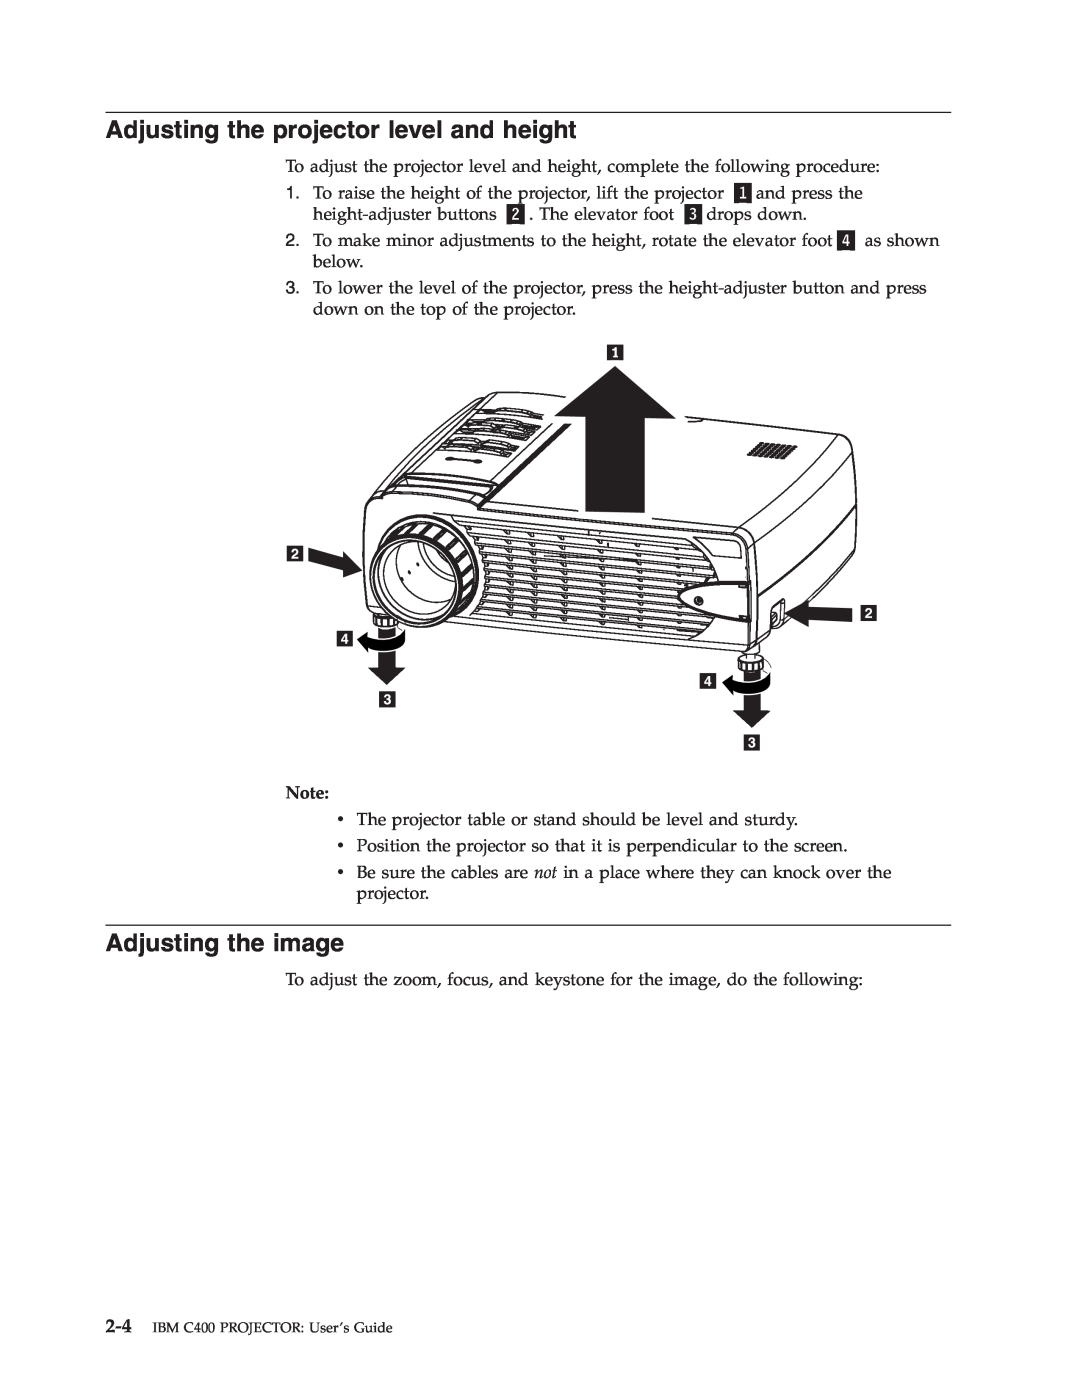 IBM PROJECTOR C400 manual Adjusting the projector level and height, Adjusting the image 